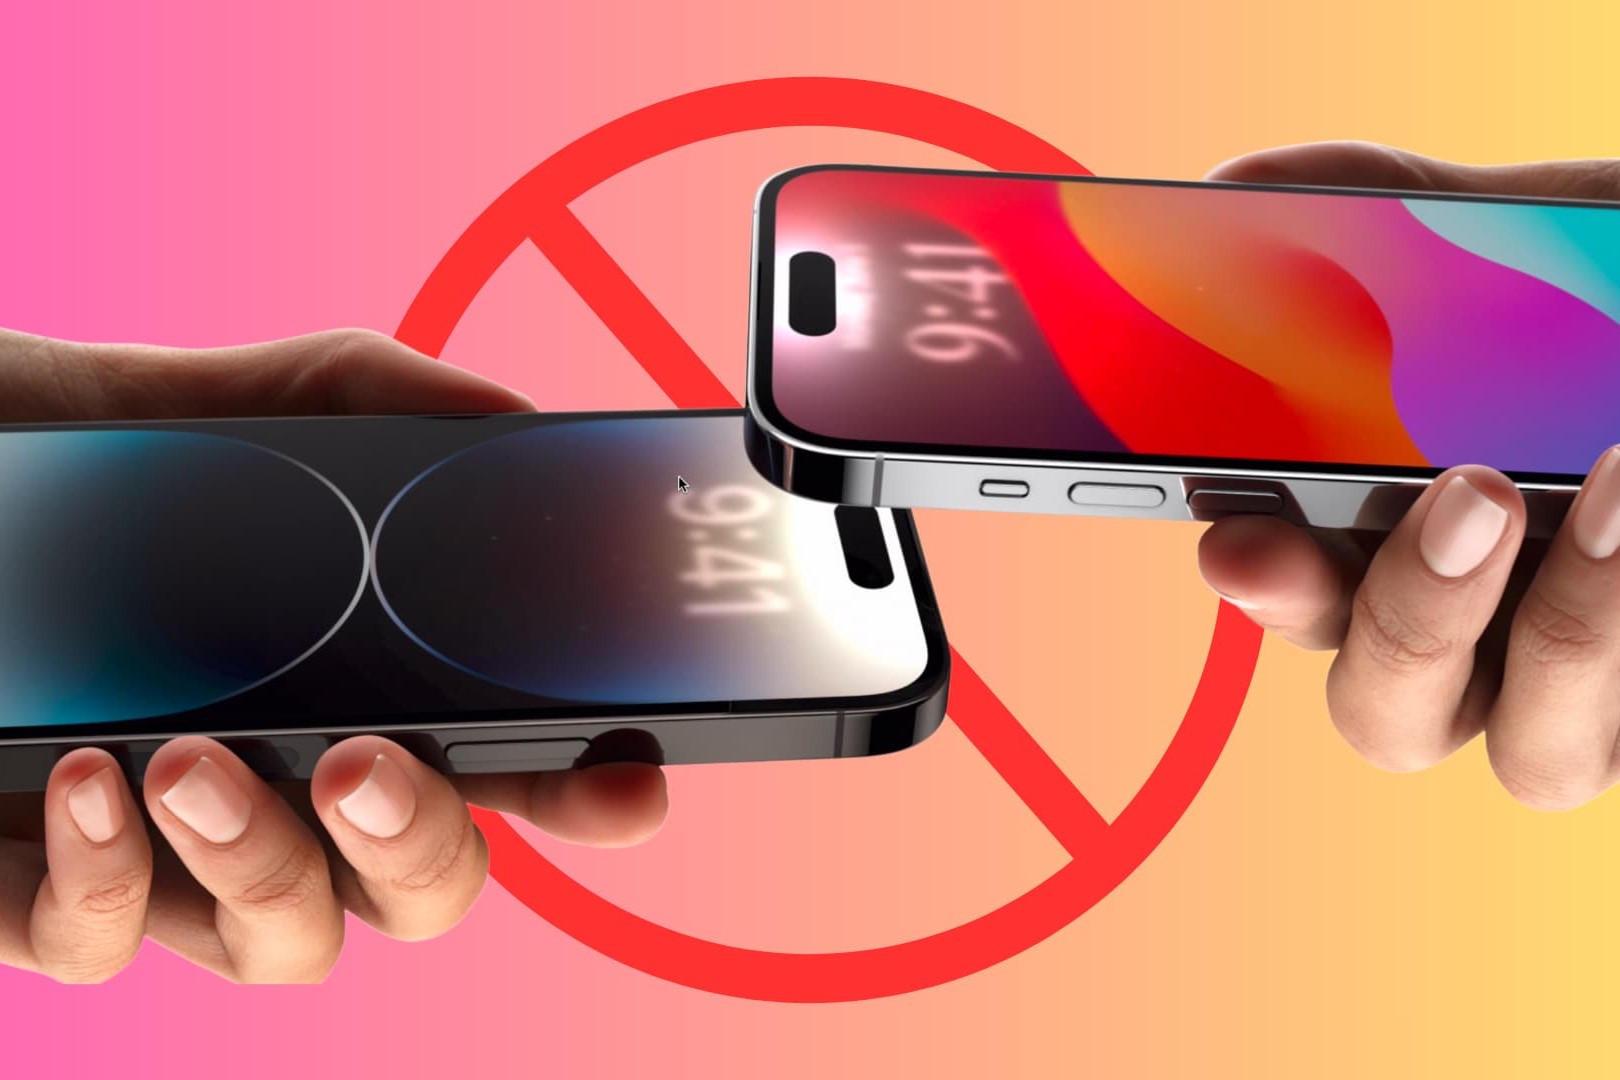 Quick Steps To Disable NFC On Your IPhone